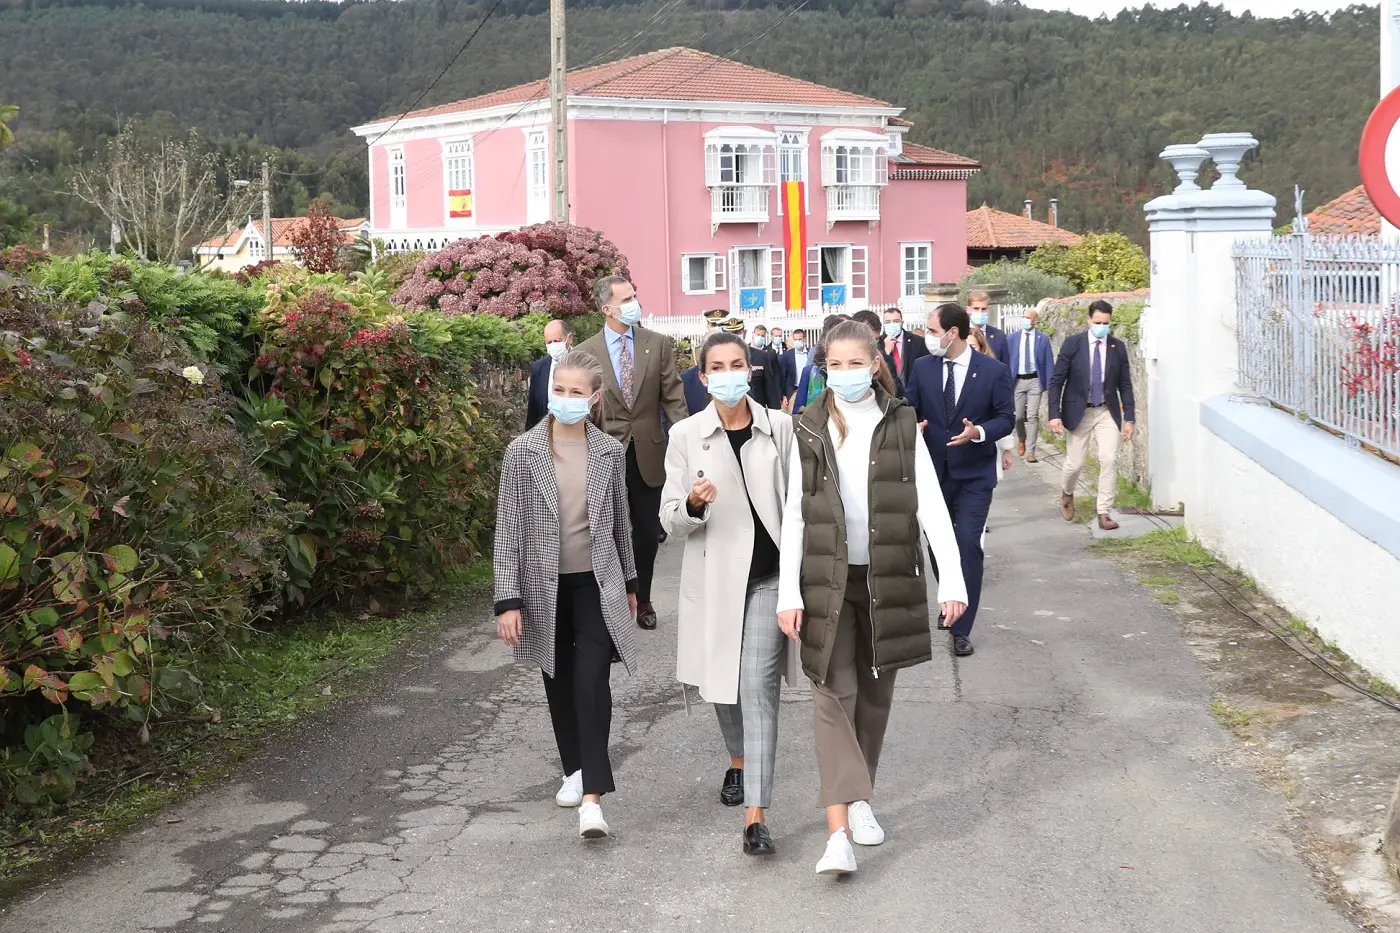 Spain Royals during the tour of Somao Exemplary Town of Asturias 2020